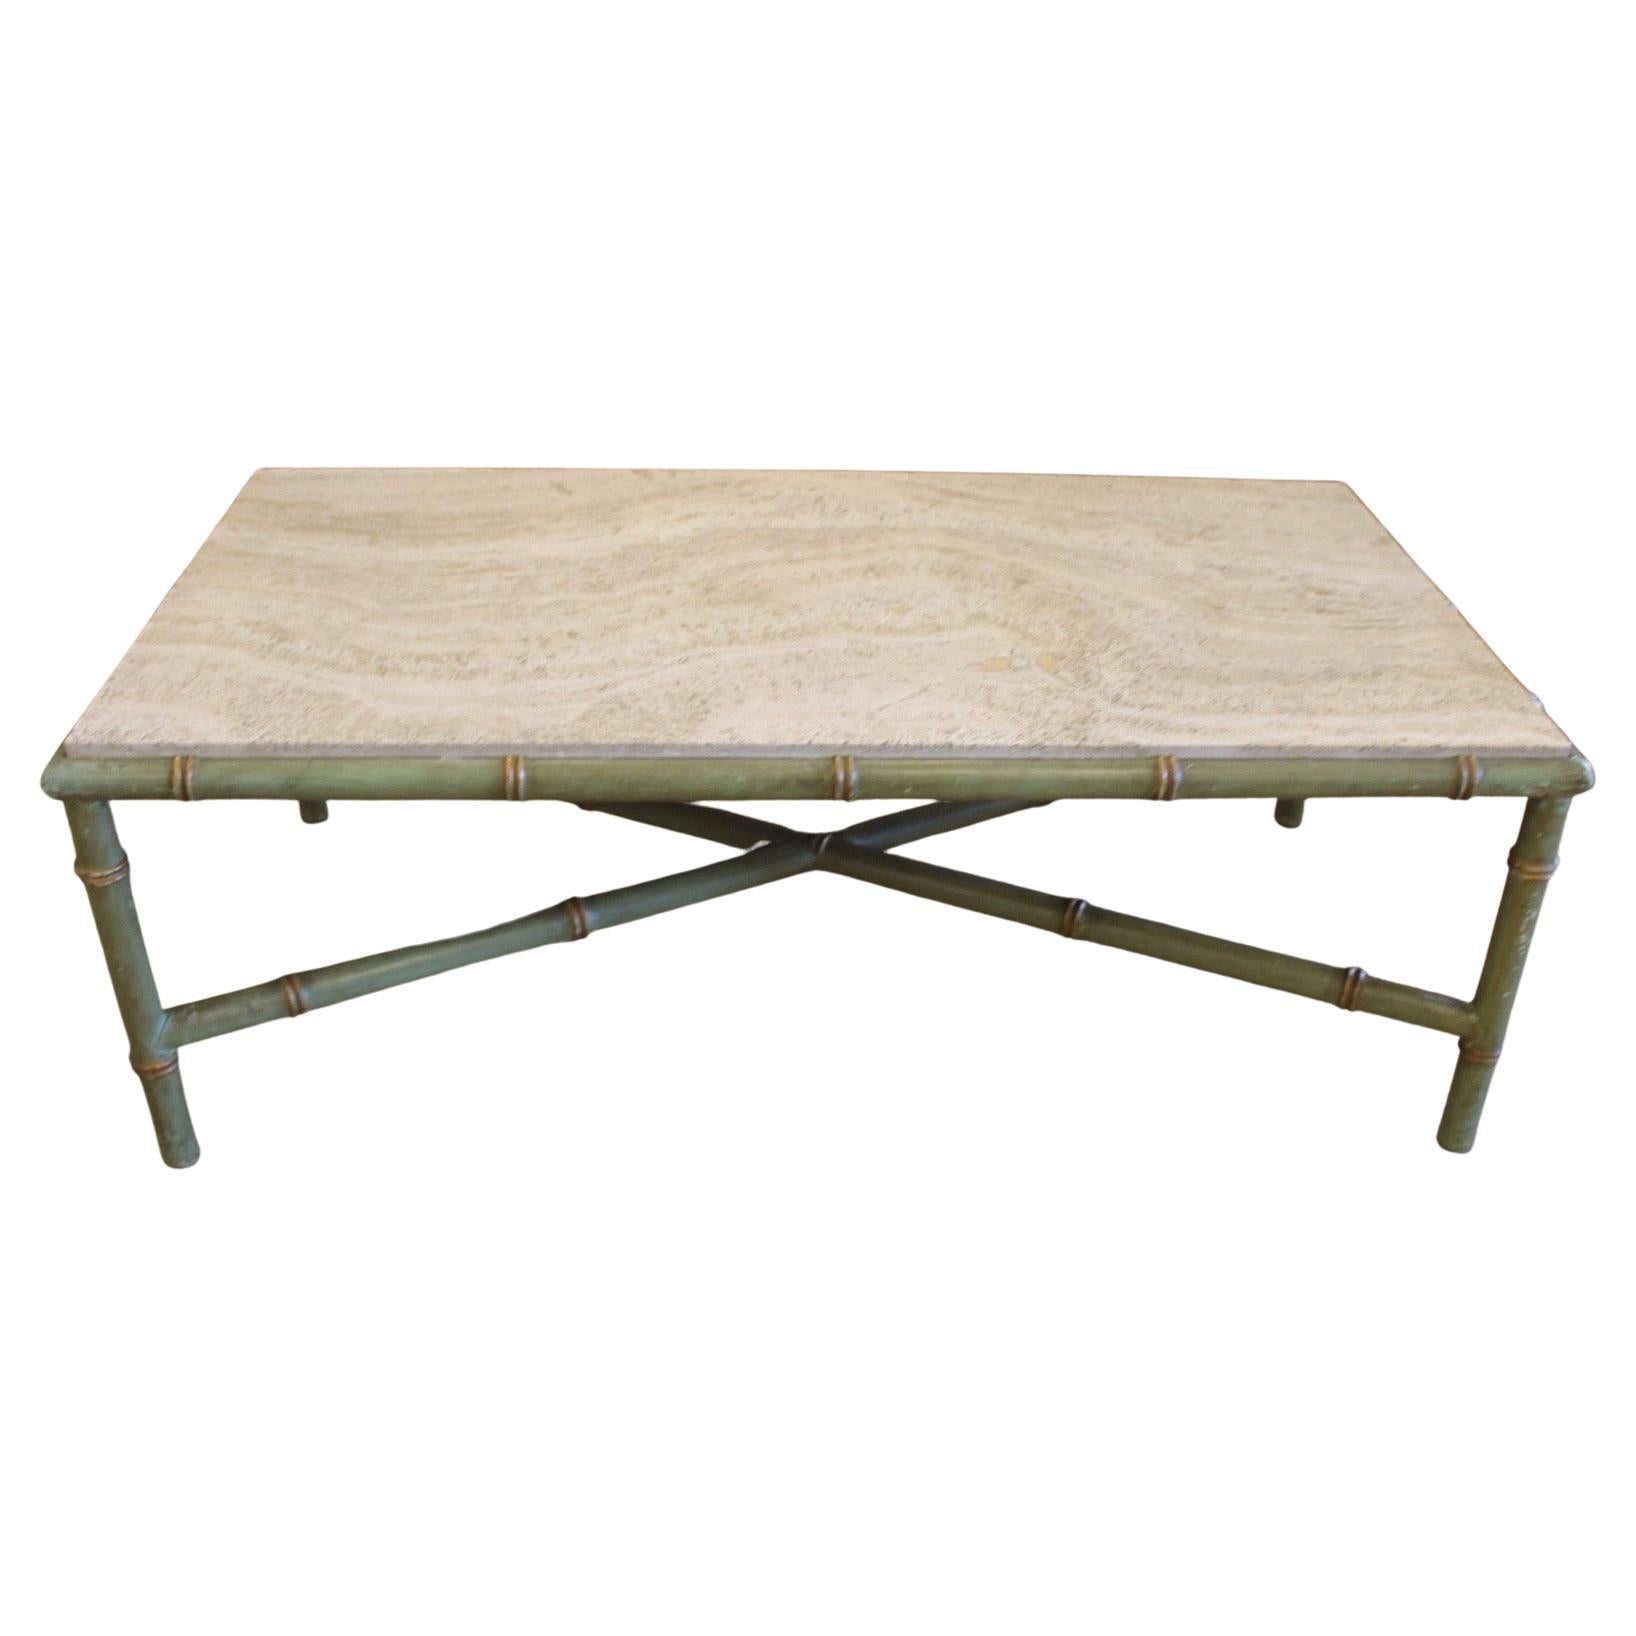 Bamboo Table, Travertine, 1970 For Sale